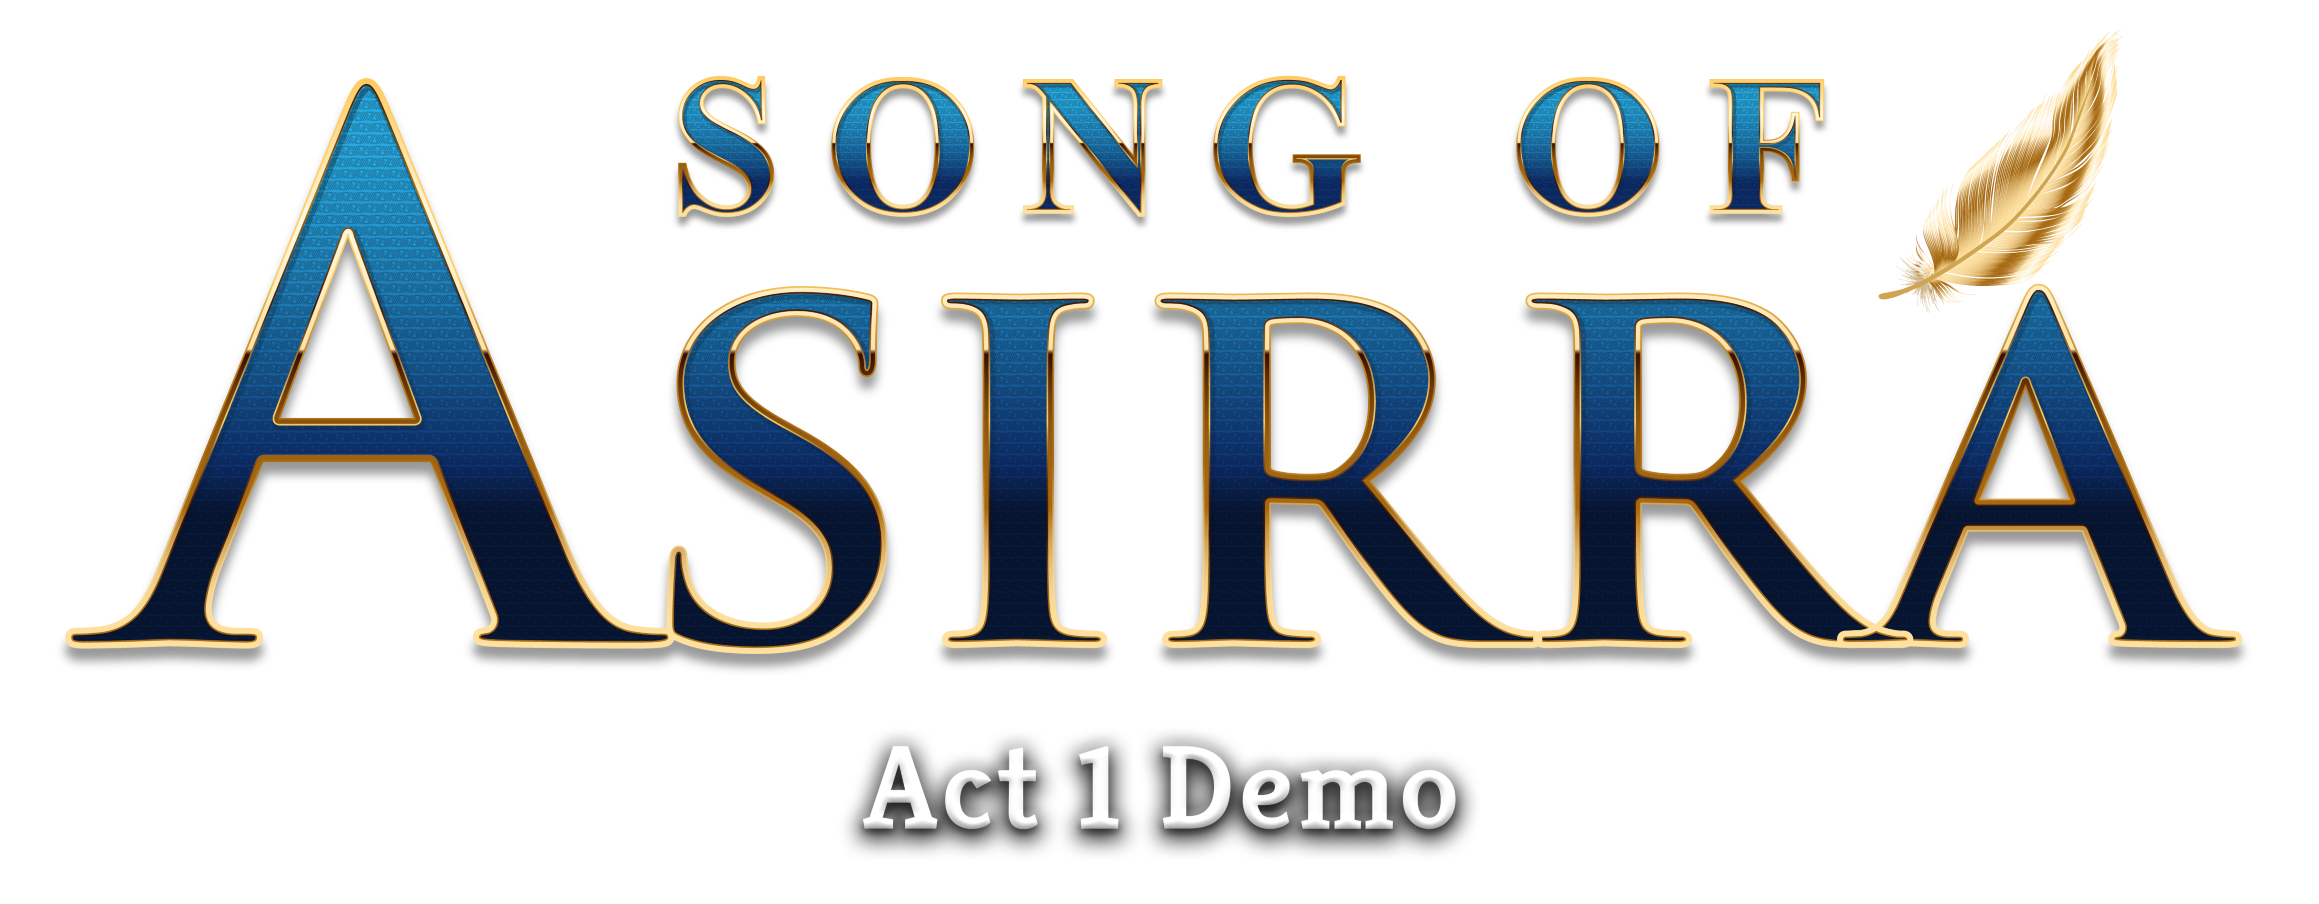 Song of Asirra - Act 1 Demo (Legacy)